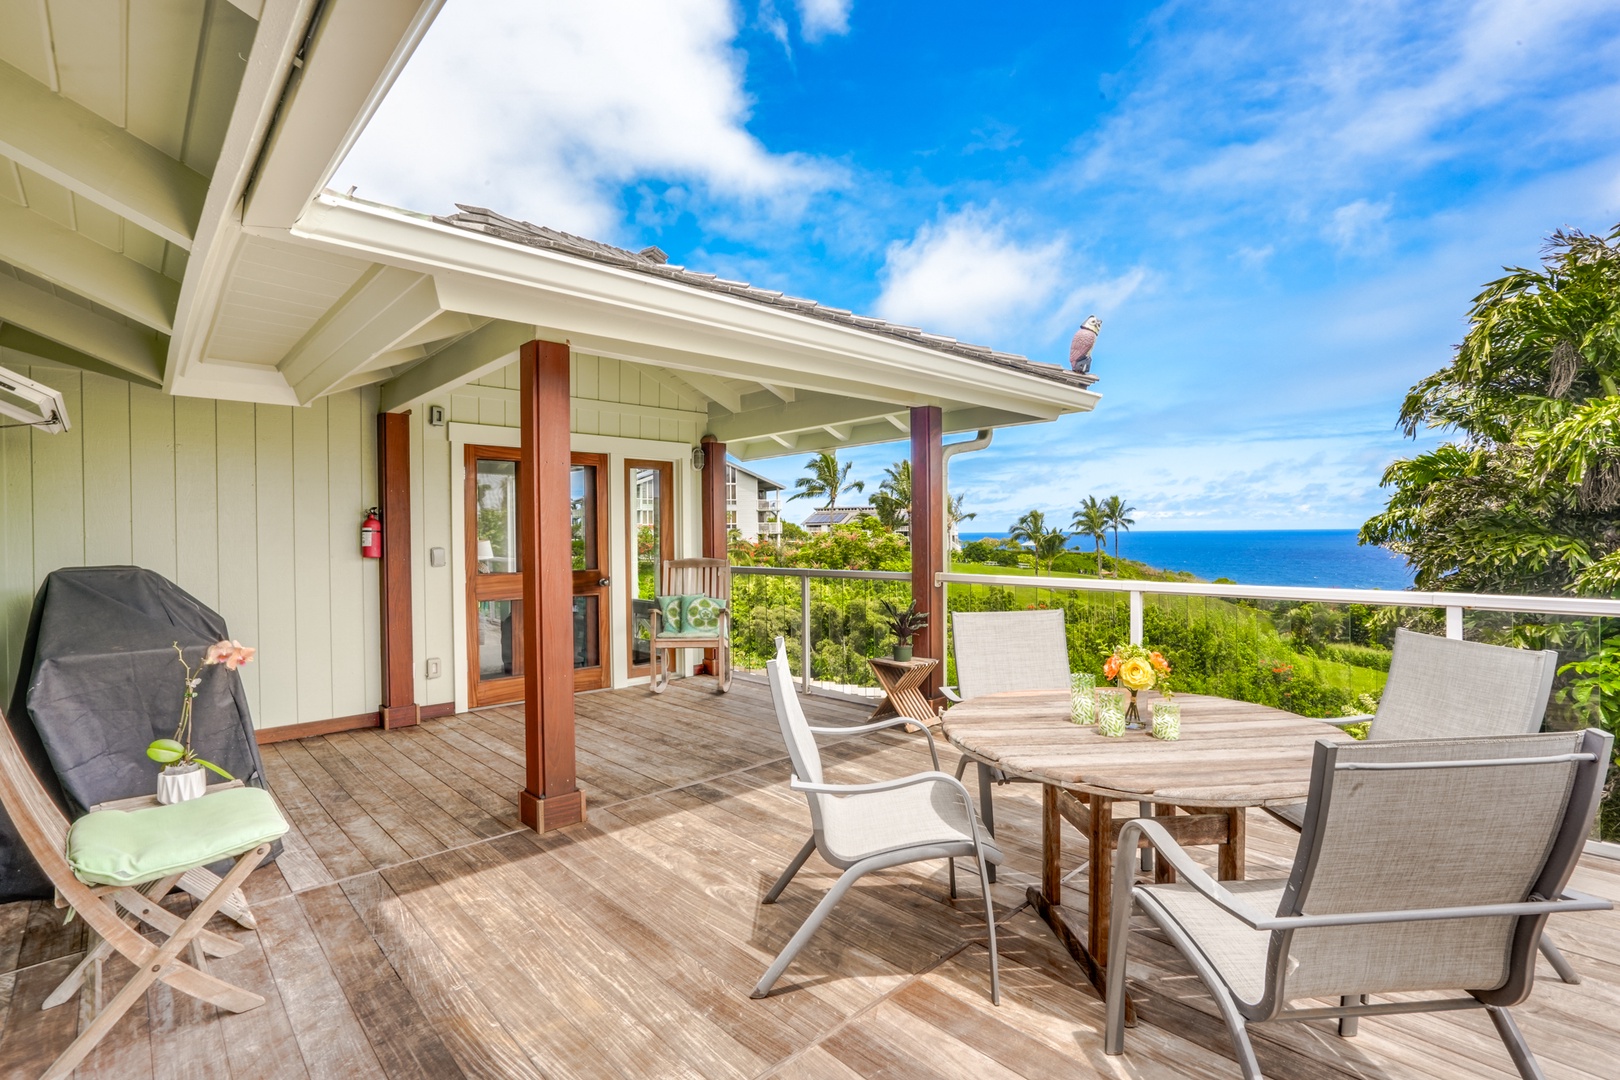 Princeville Vacation Rentals, Wai Lani - Private lanai for a morning coffee or sweet nightly conversations.